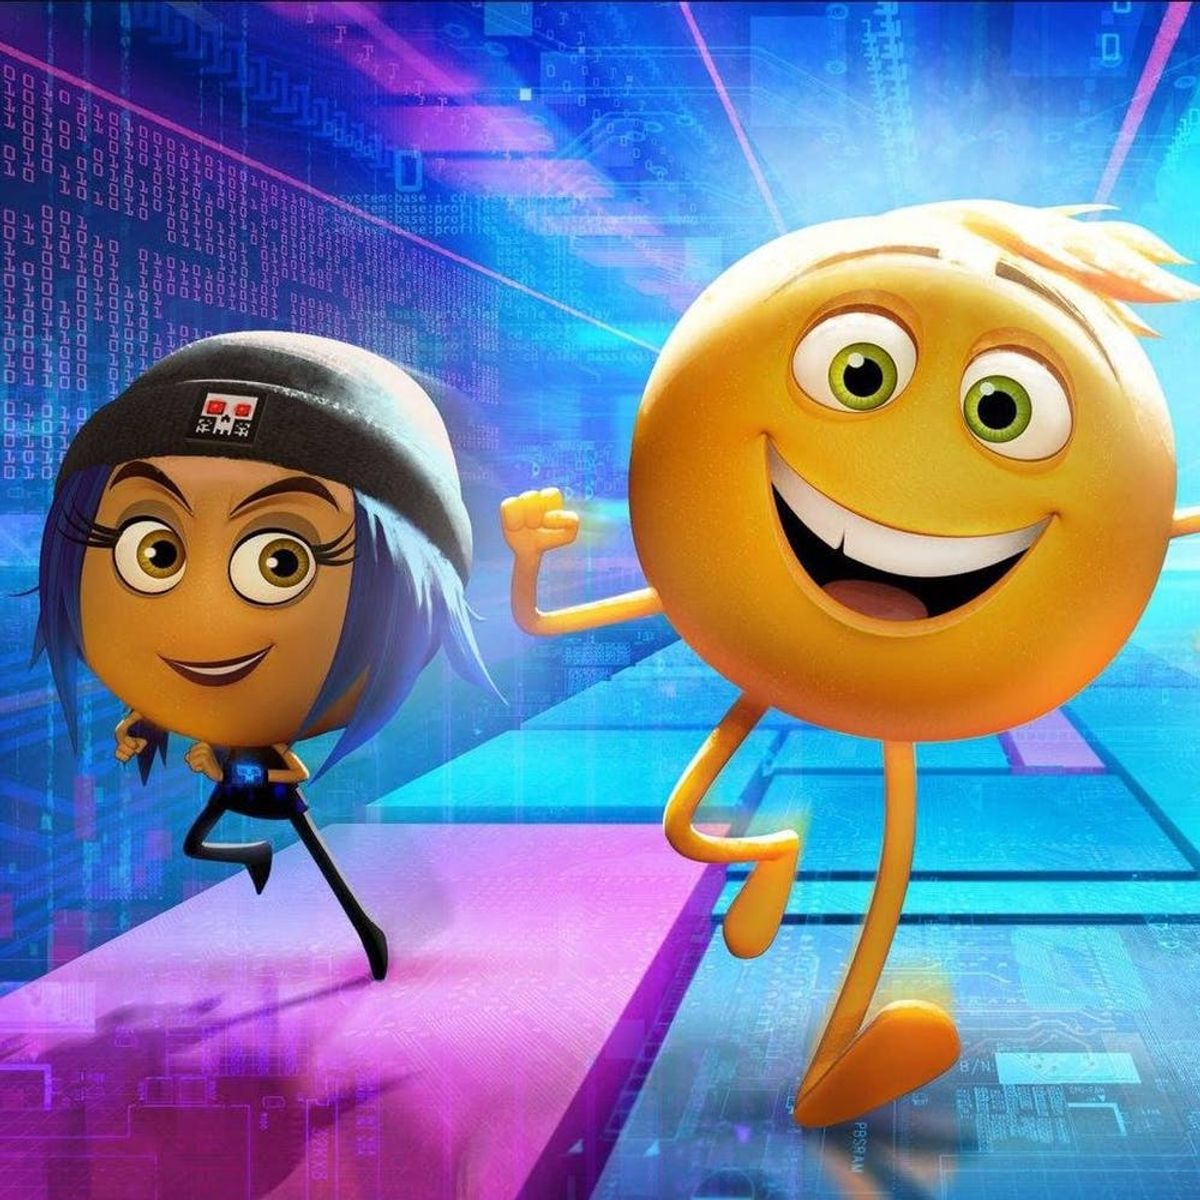 Emoji Are Getting Their Own Movie, and Twitter Hates It Already